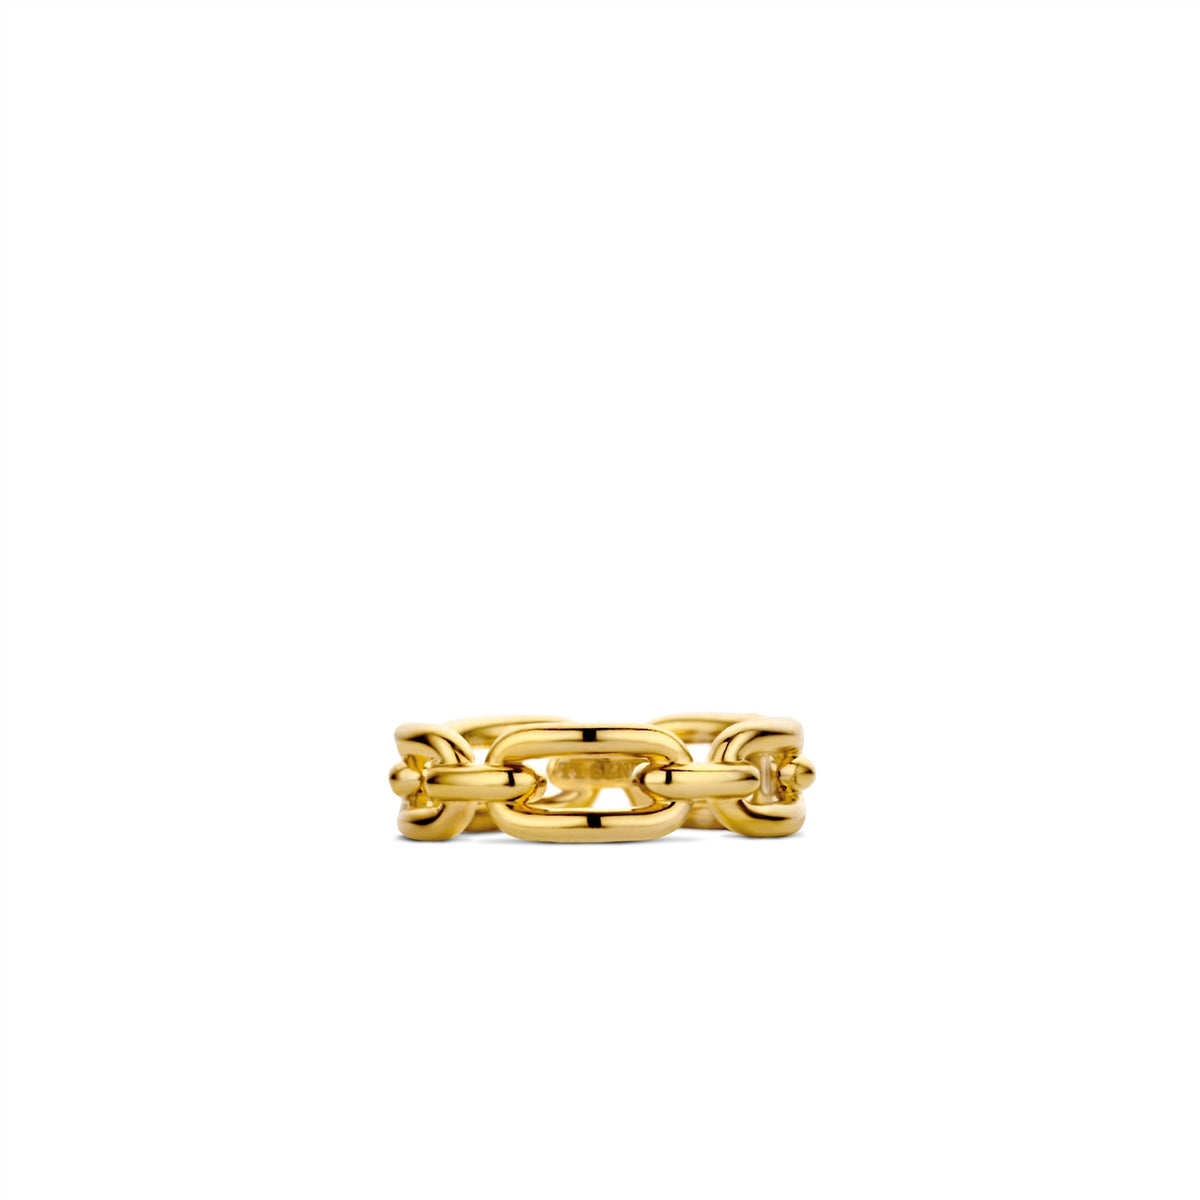 TI SENTO Sterling Silver Gold Tone Chain Link Ring